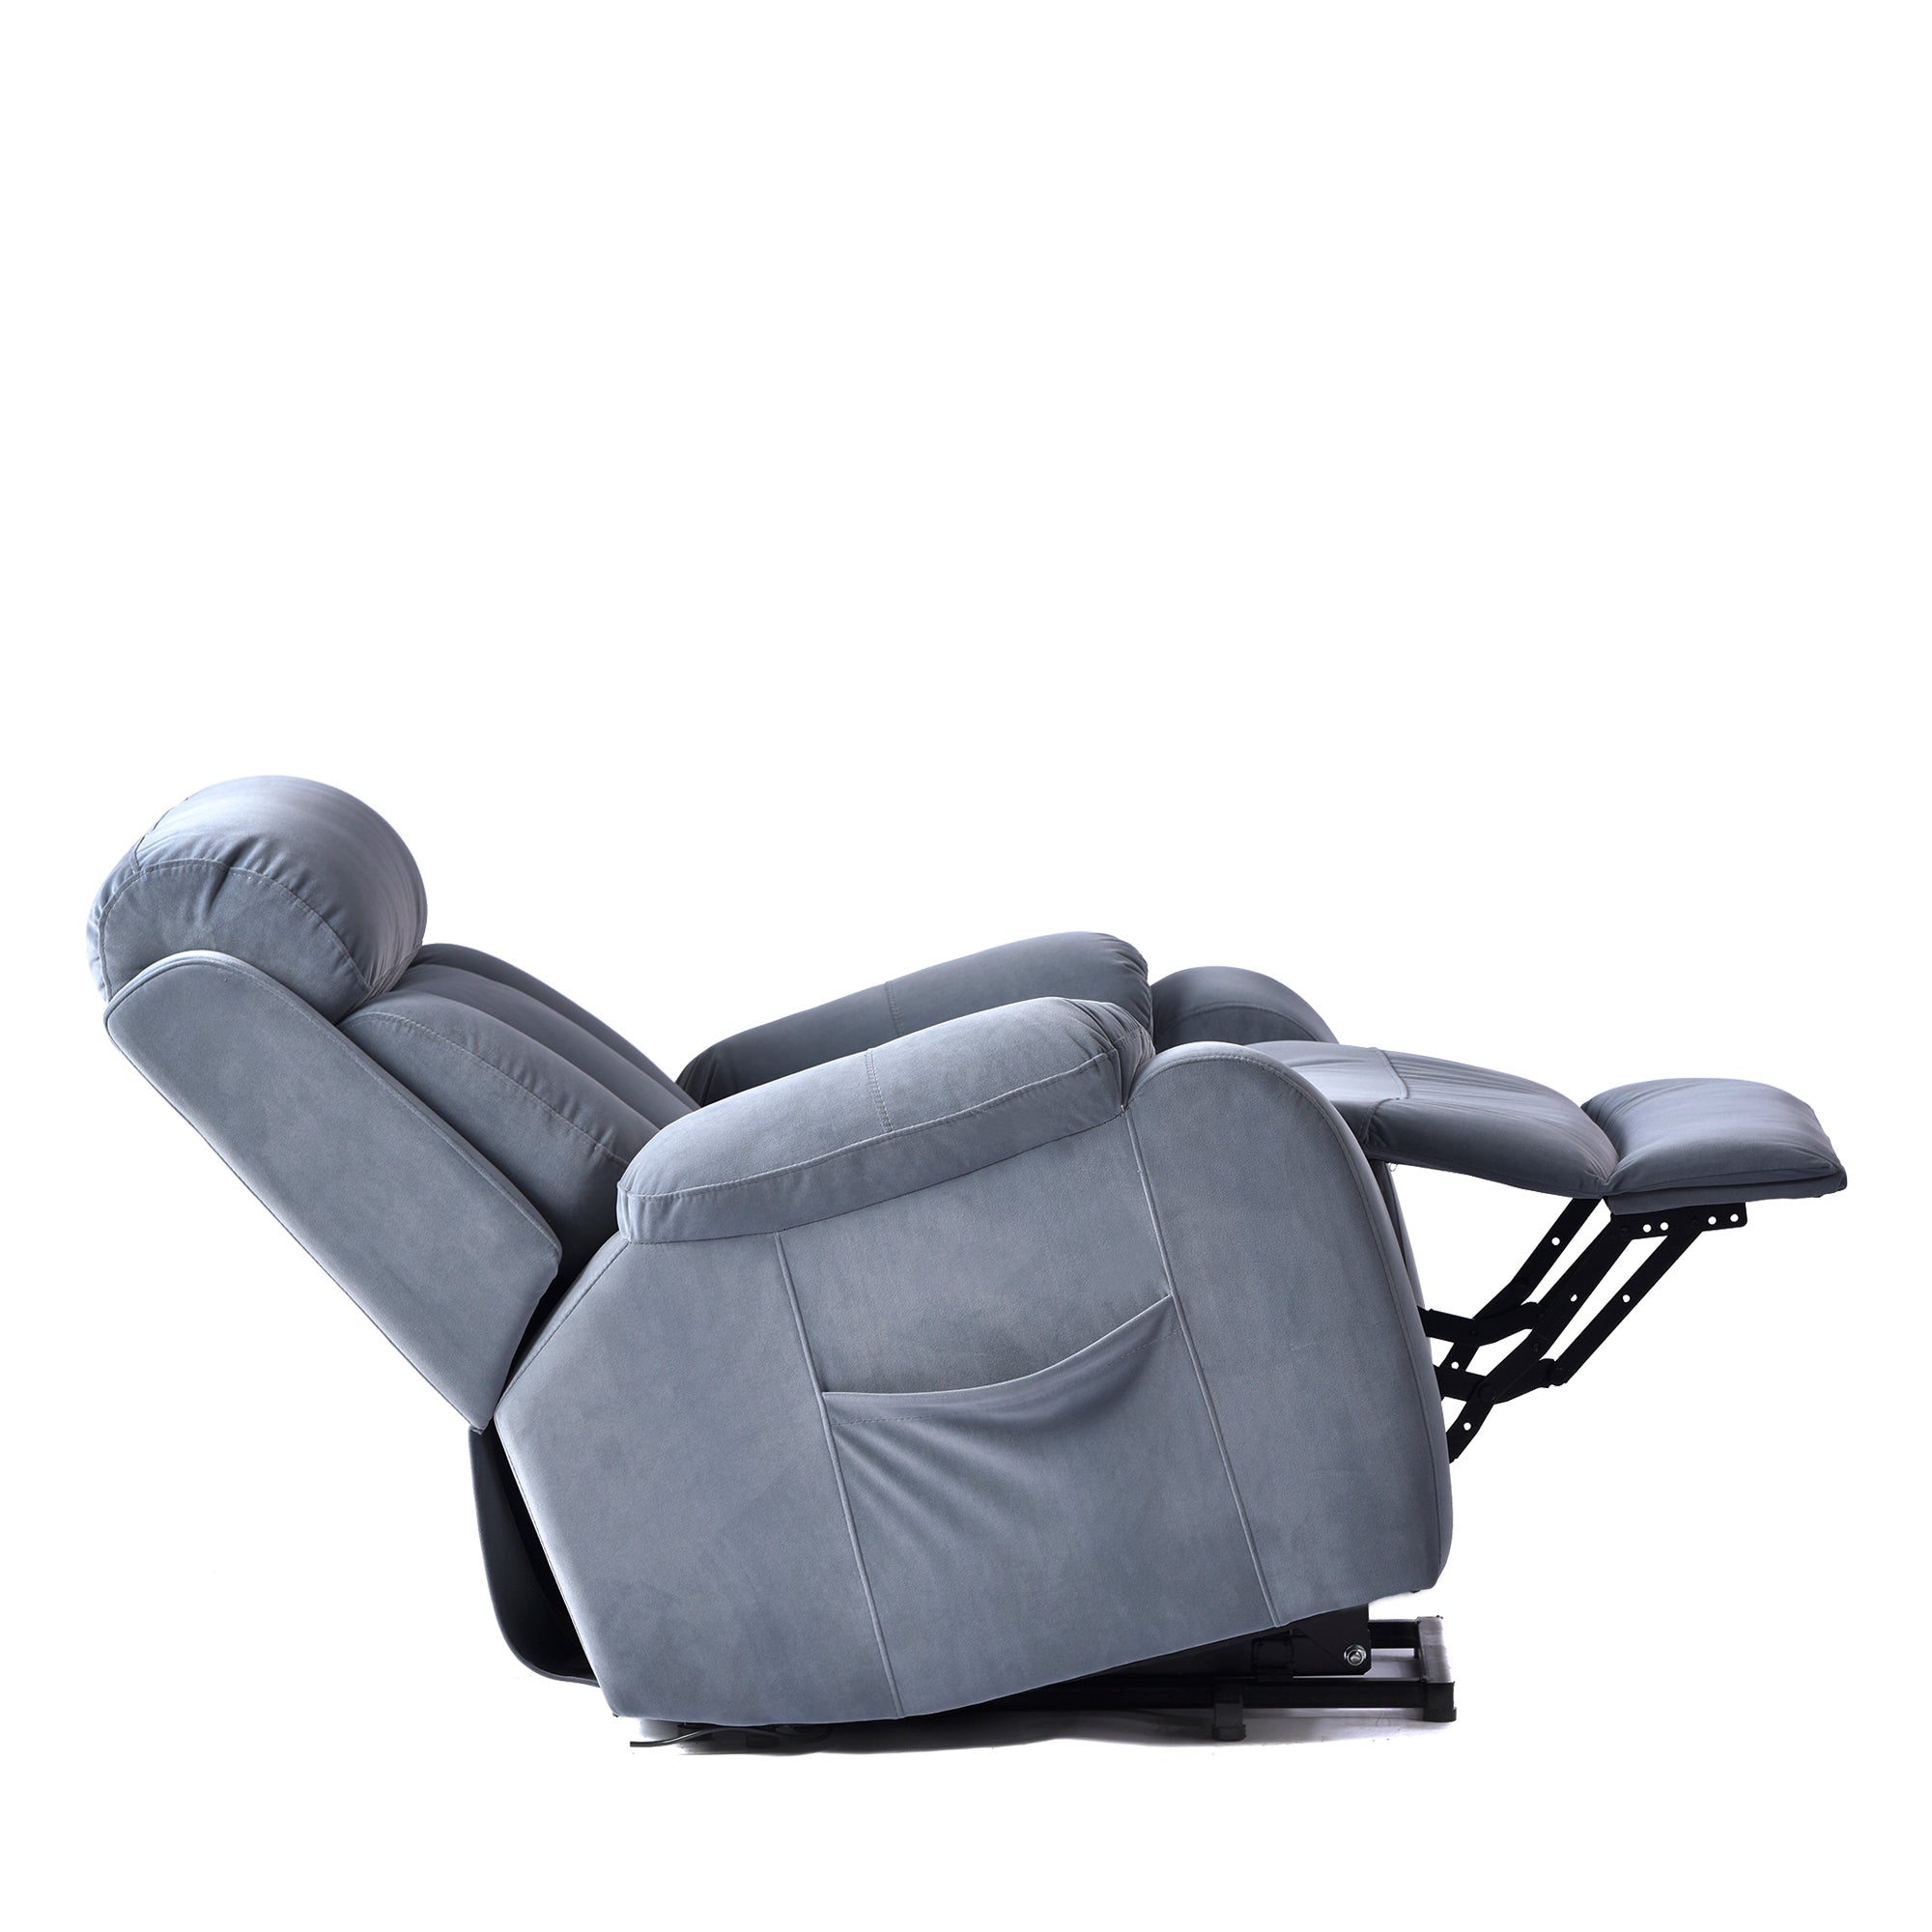 Reclined position for power lift chair recliner